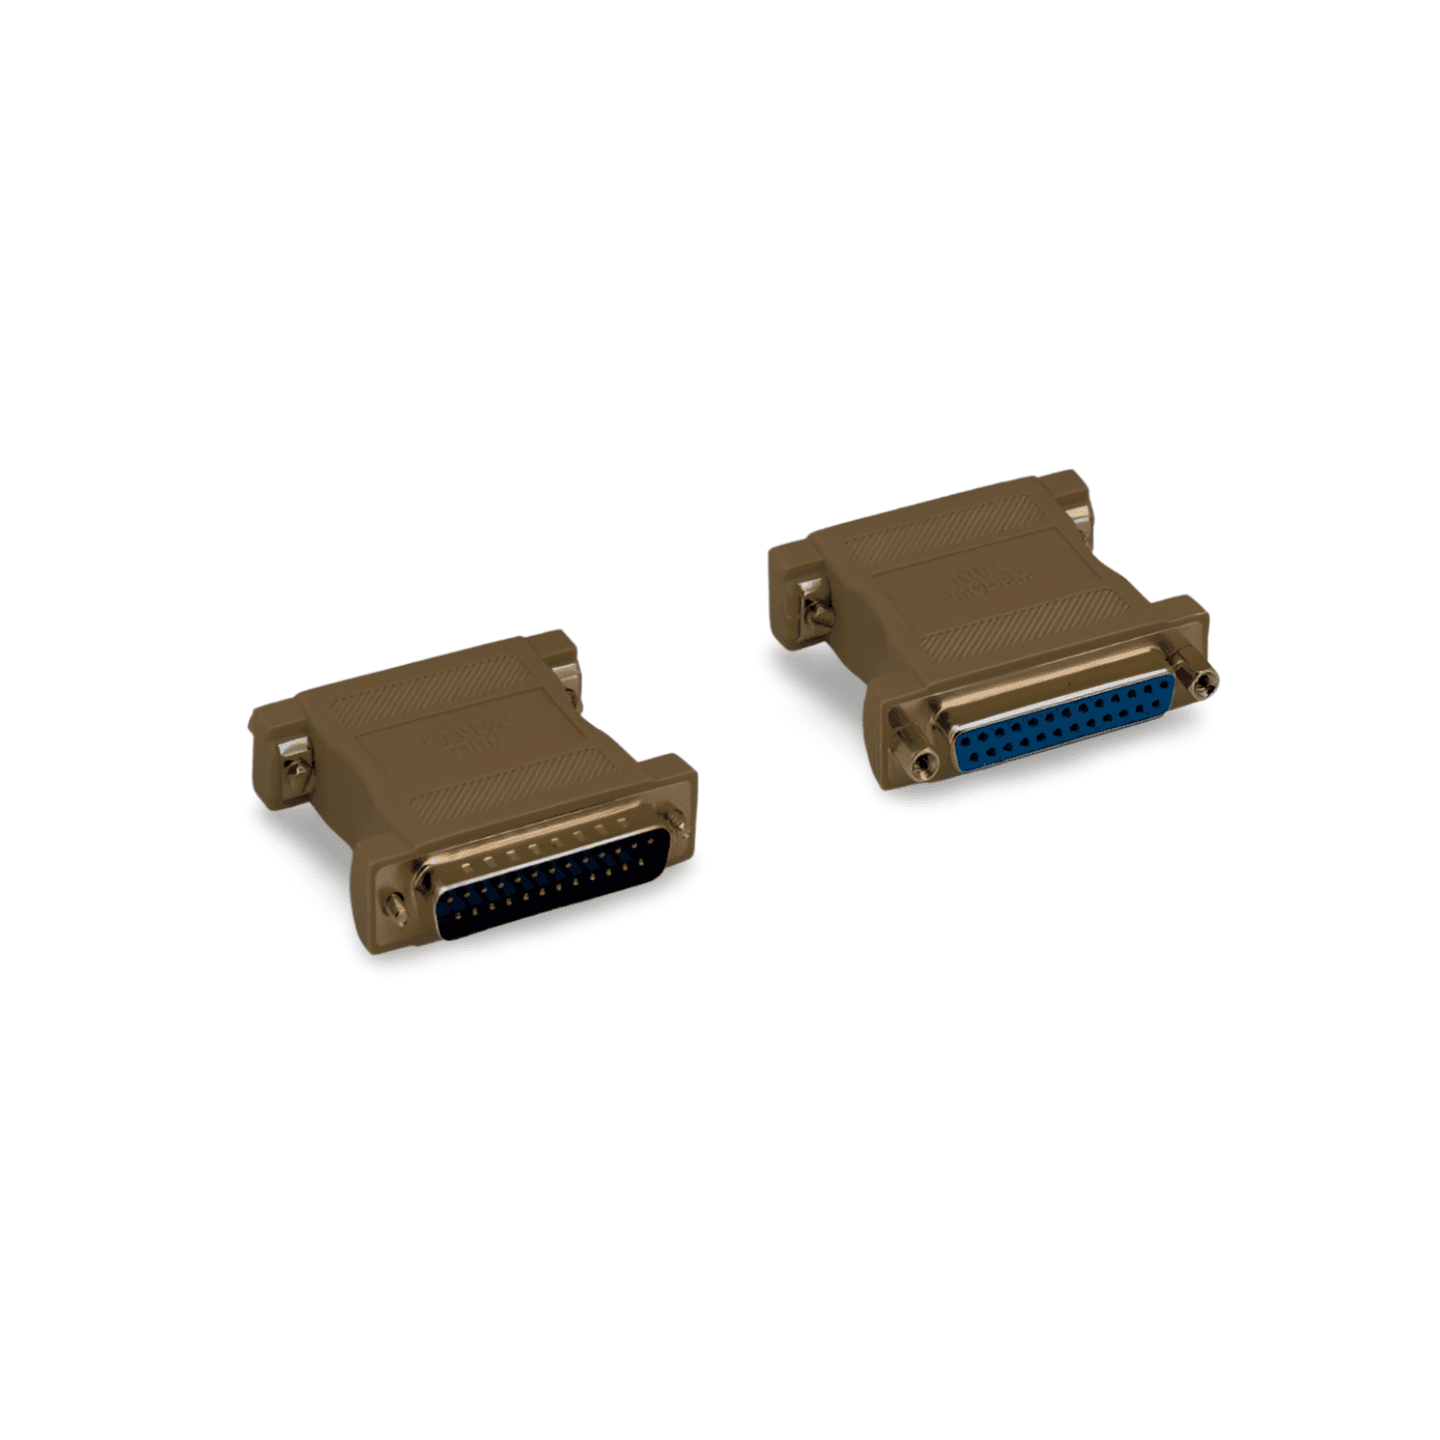 1in Null Modem Adapter DB25 Female to DB25 Male beige